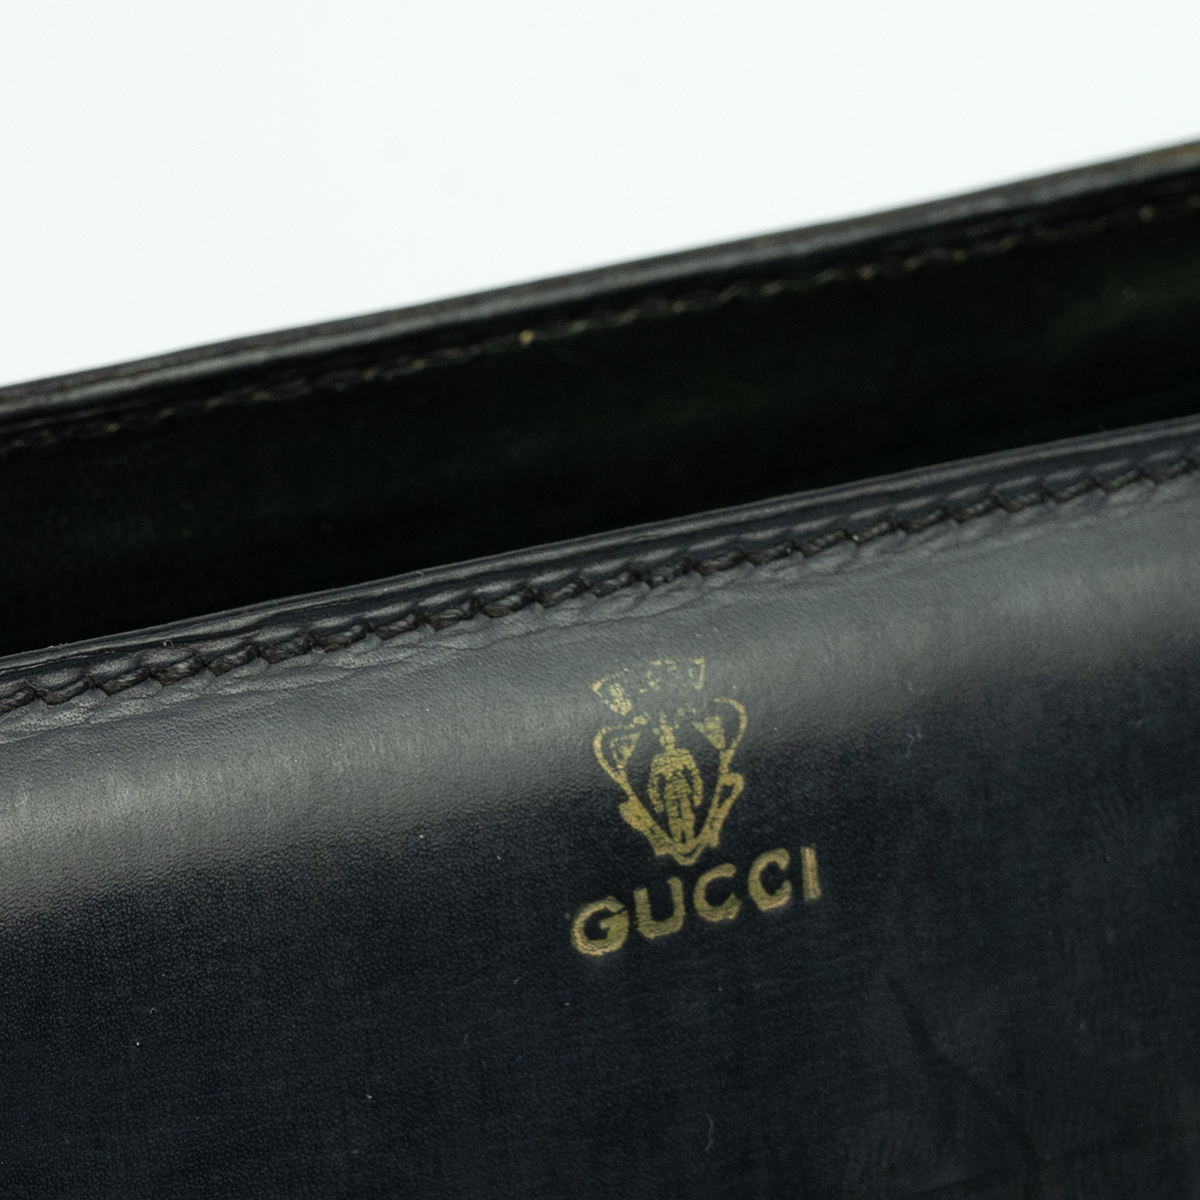 Circa 1980s vintage Gucci black leather handbag, with gold-tone hardware, single handle, leather ... - Image 7 of 9